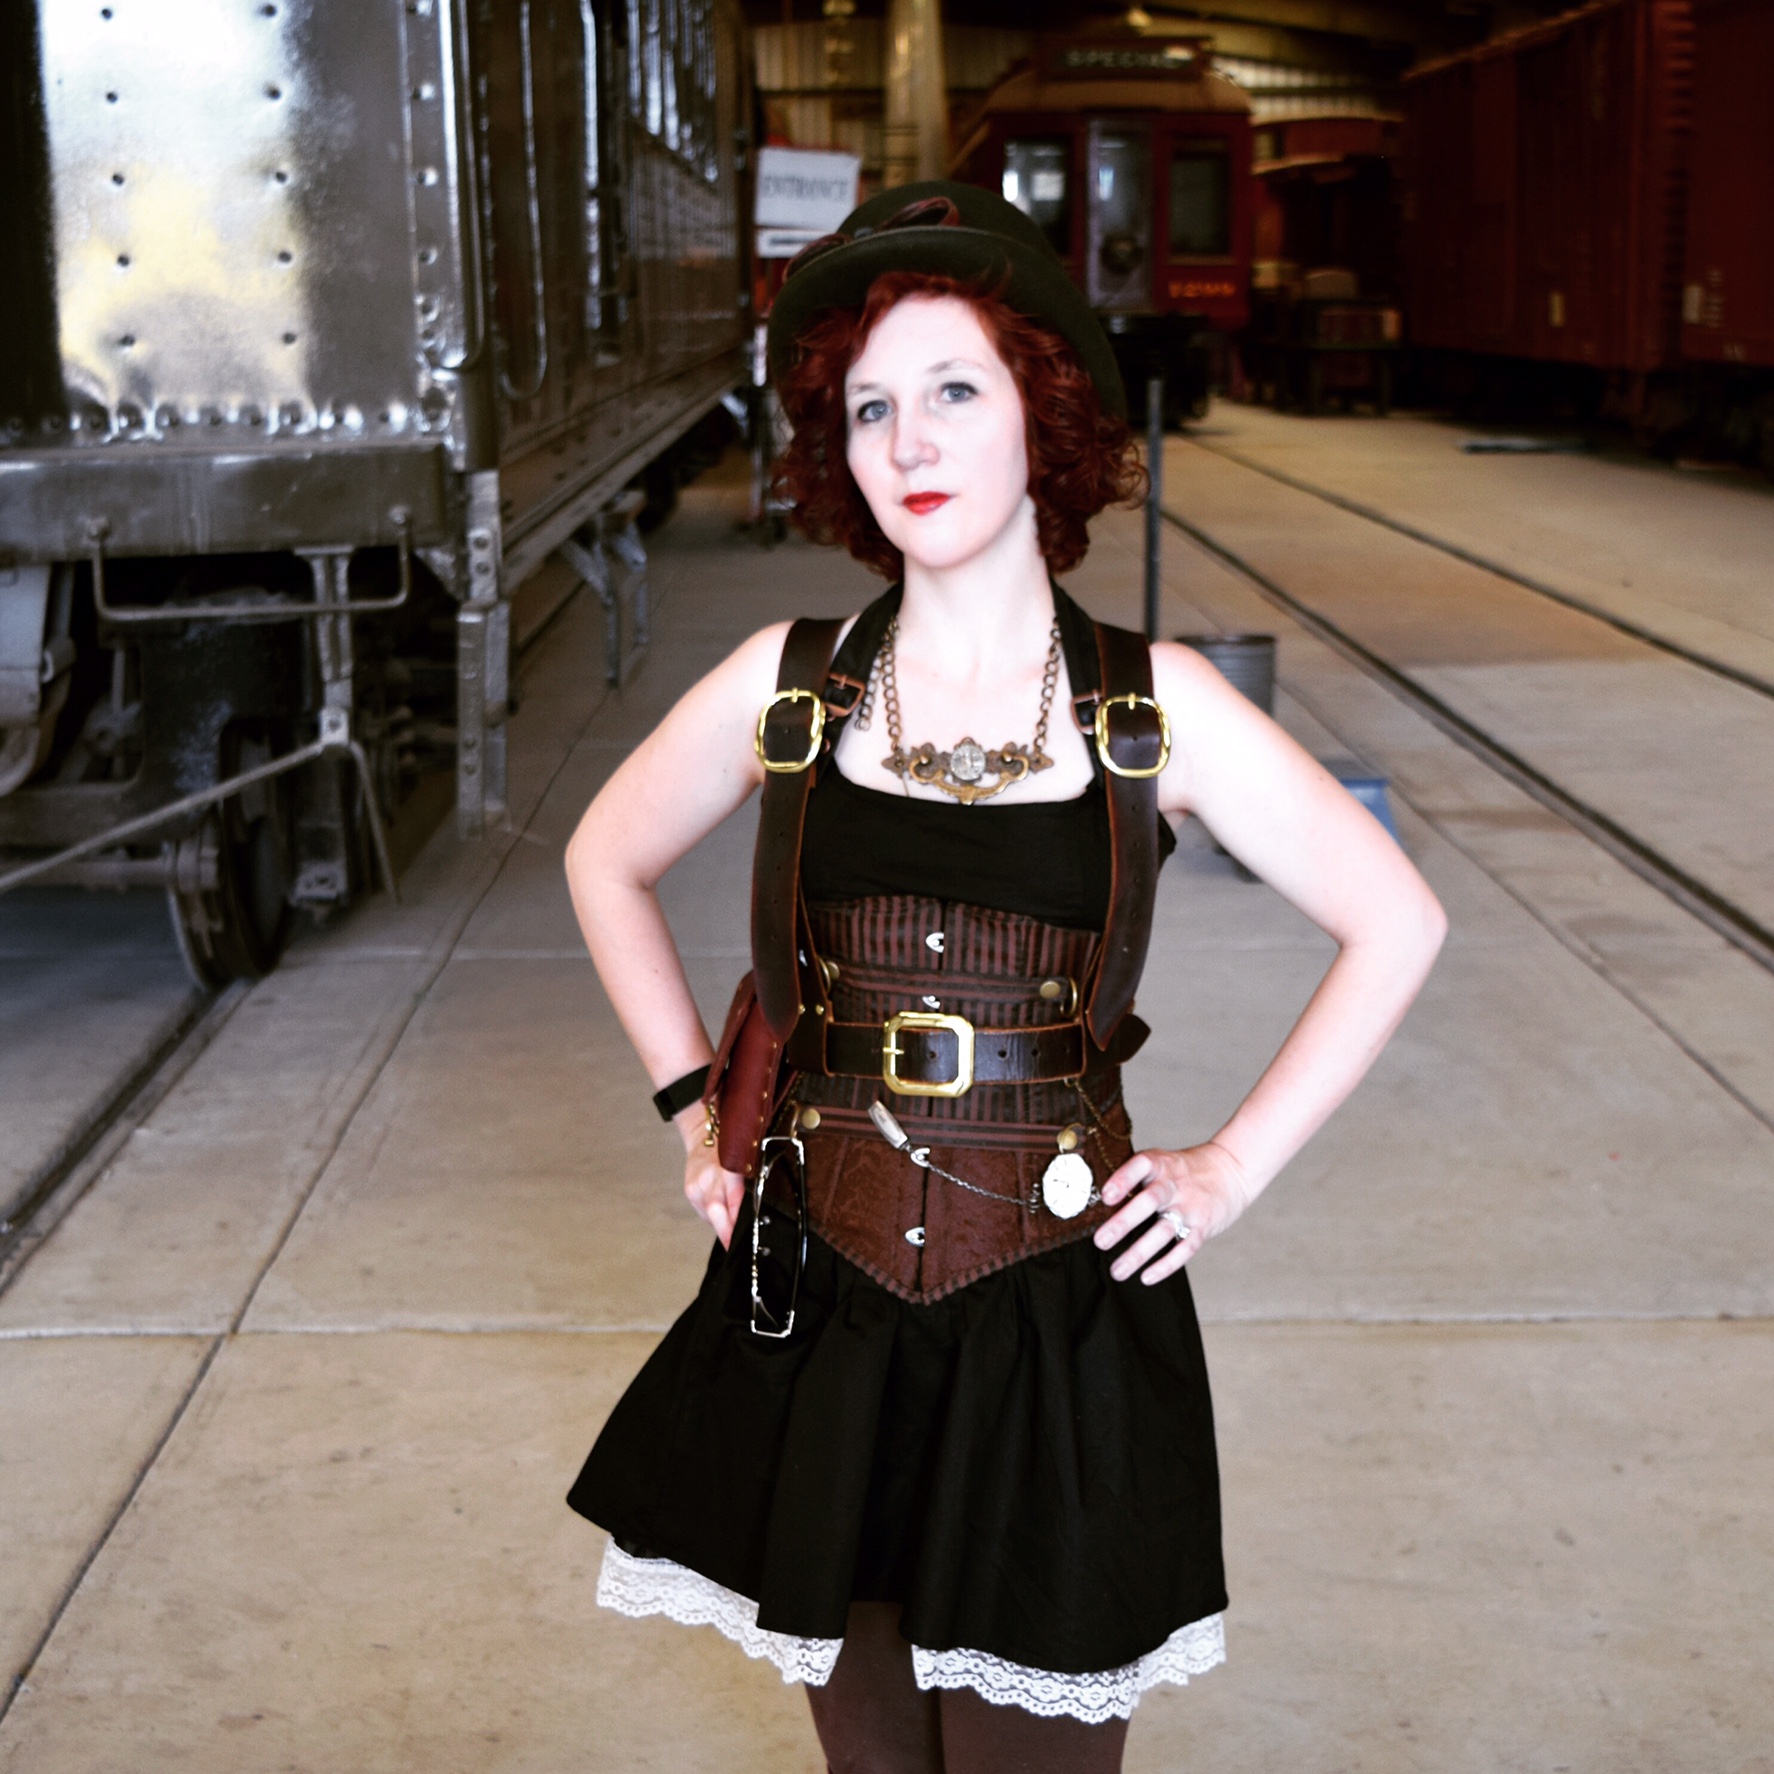 Amelia wearing a simple black dress with steampunk corset.